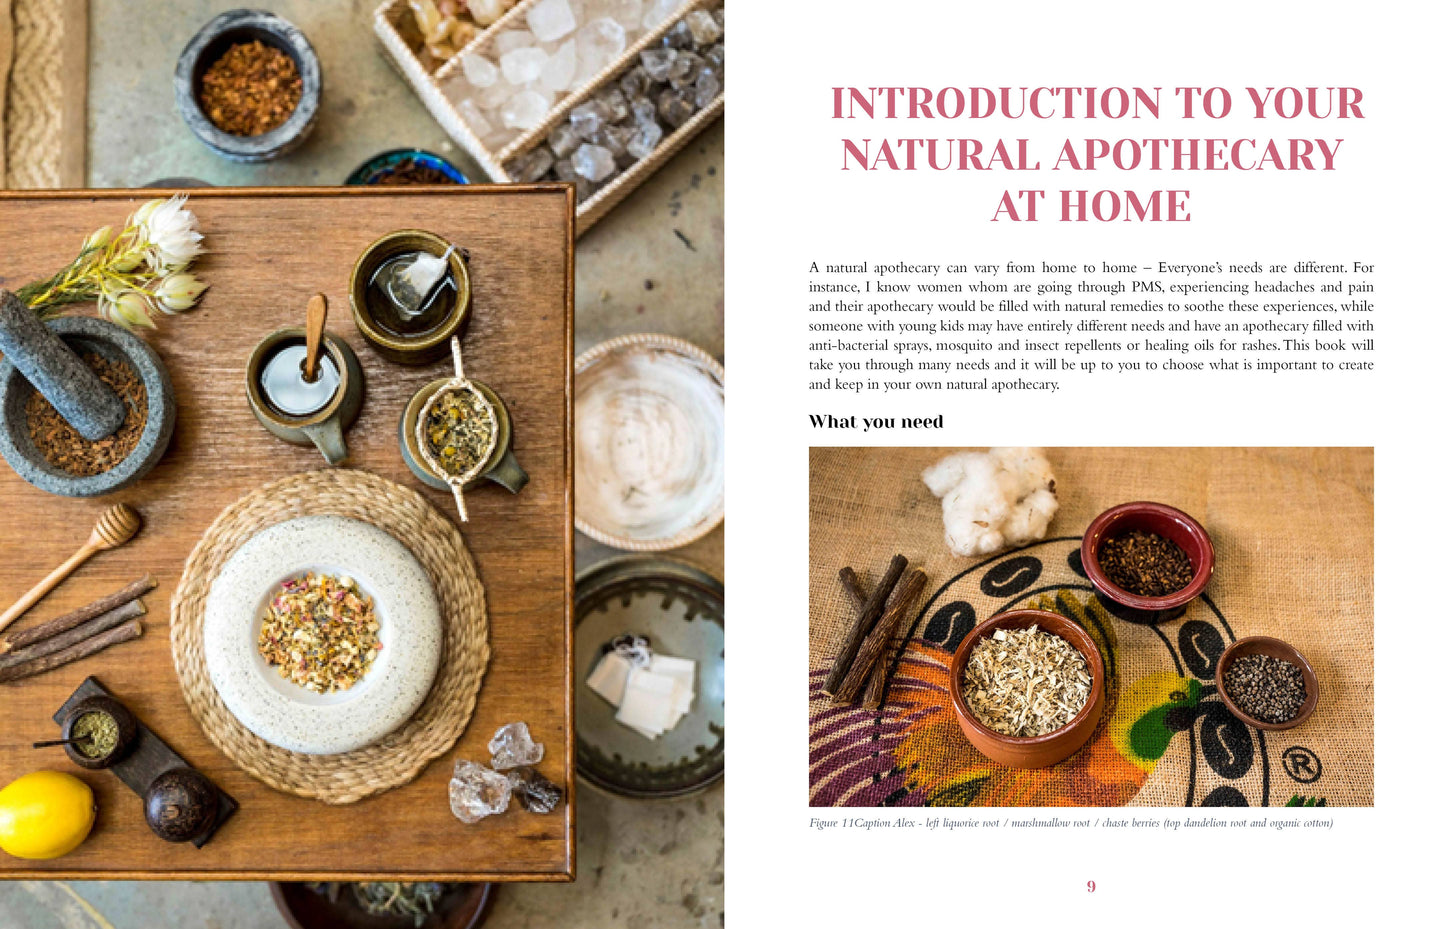 From Earth: Create Your Own Natural Apothecary (Hardcover)